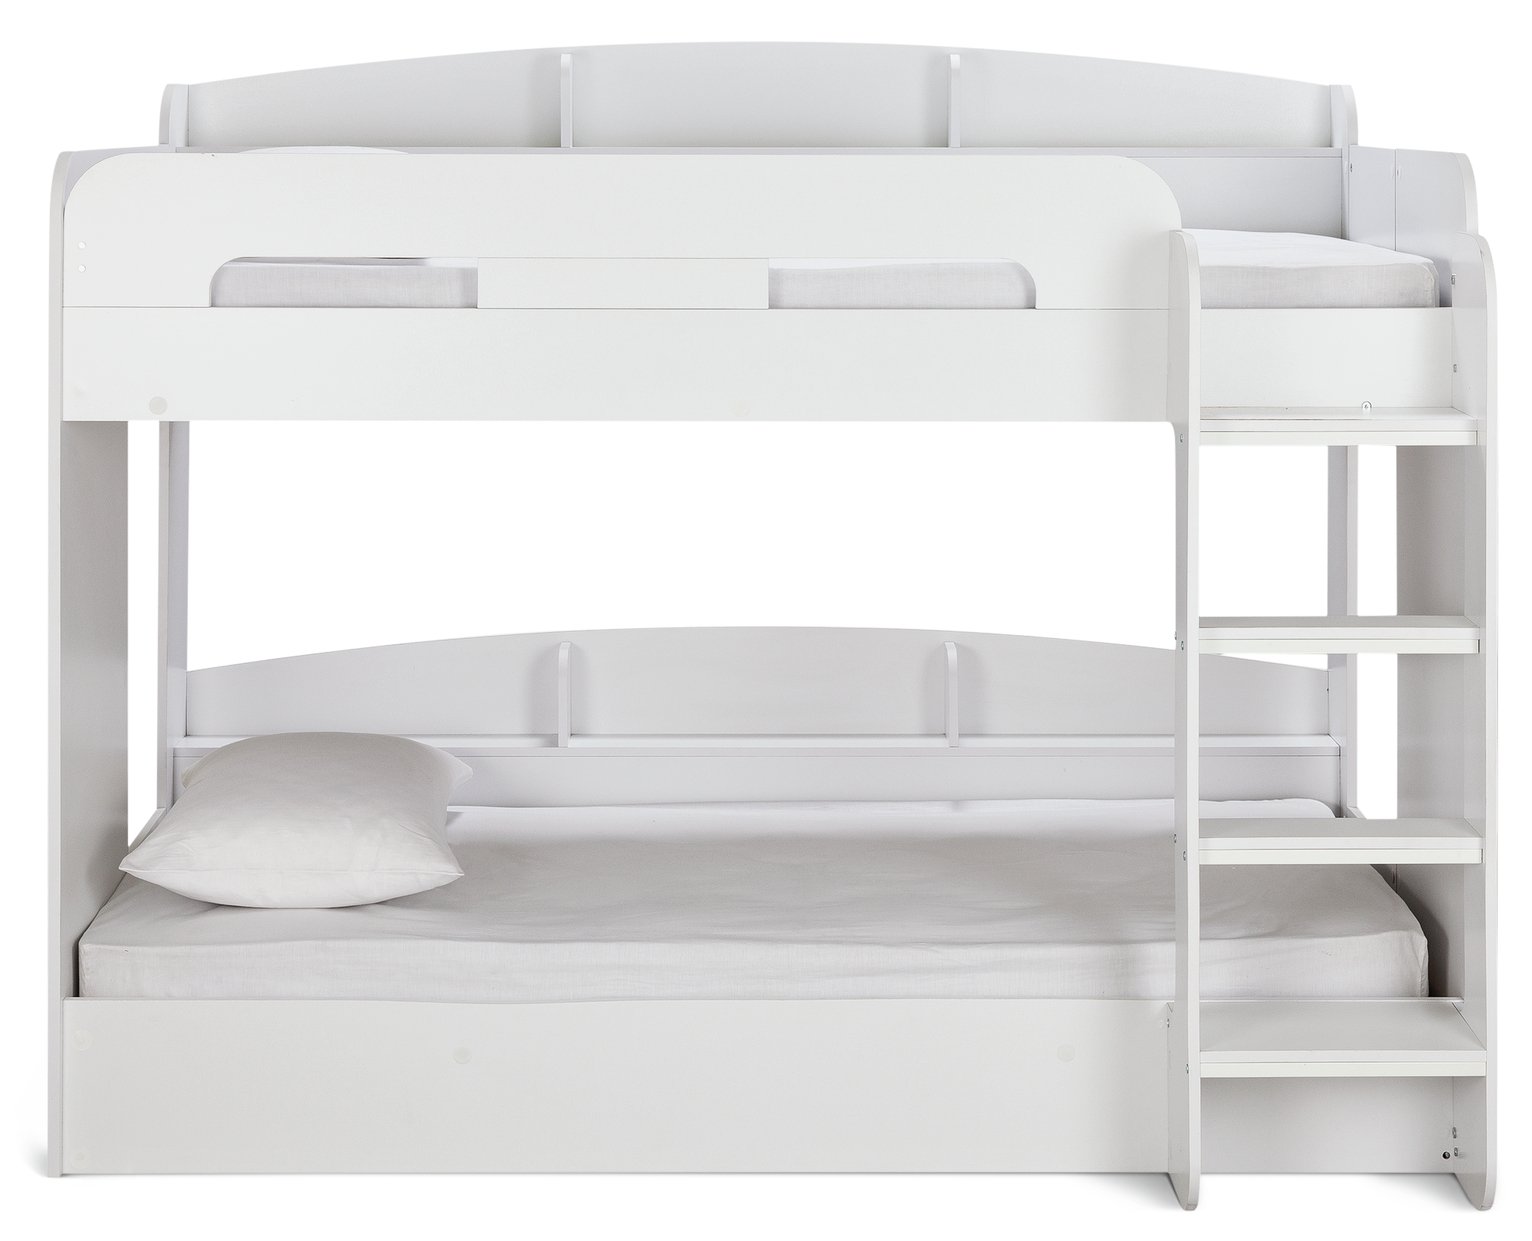 argos bunk beds with mattresses included